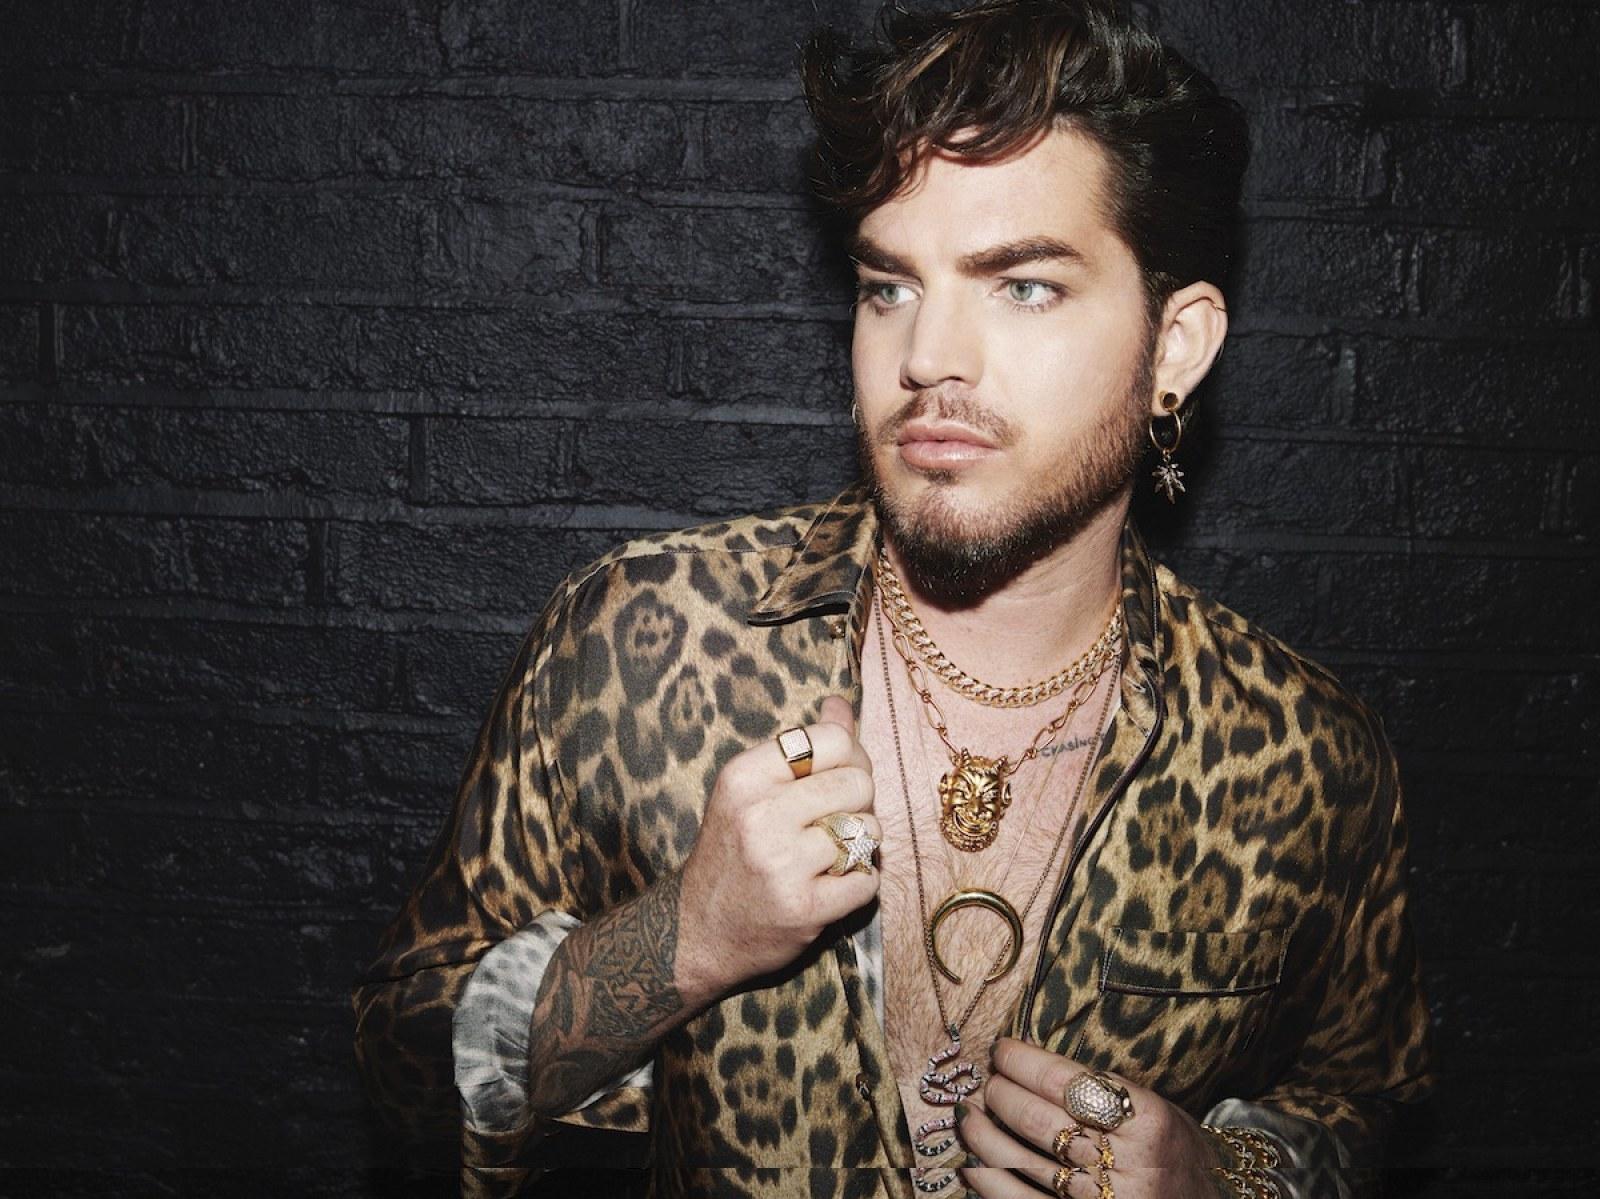 Adam Lambert on Turning to Soul and Away From Trend Based Pop